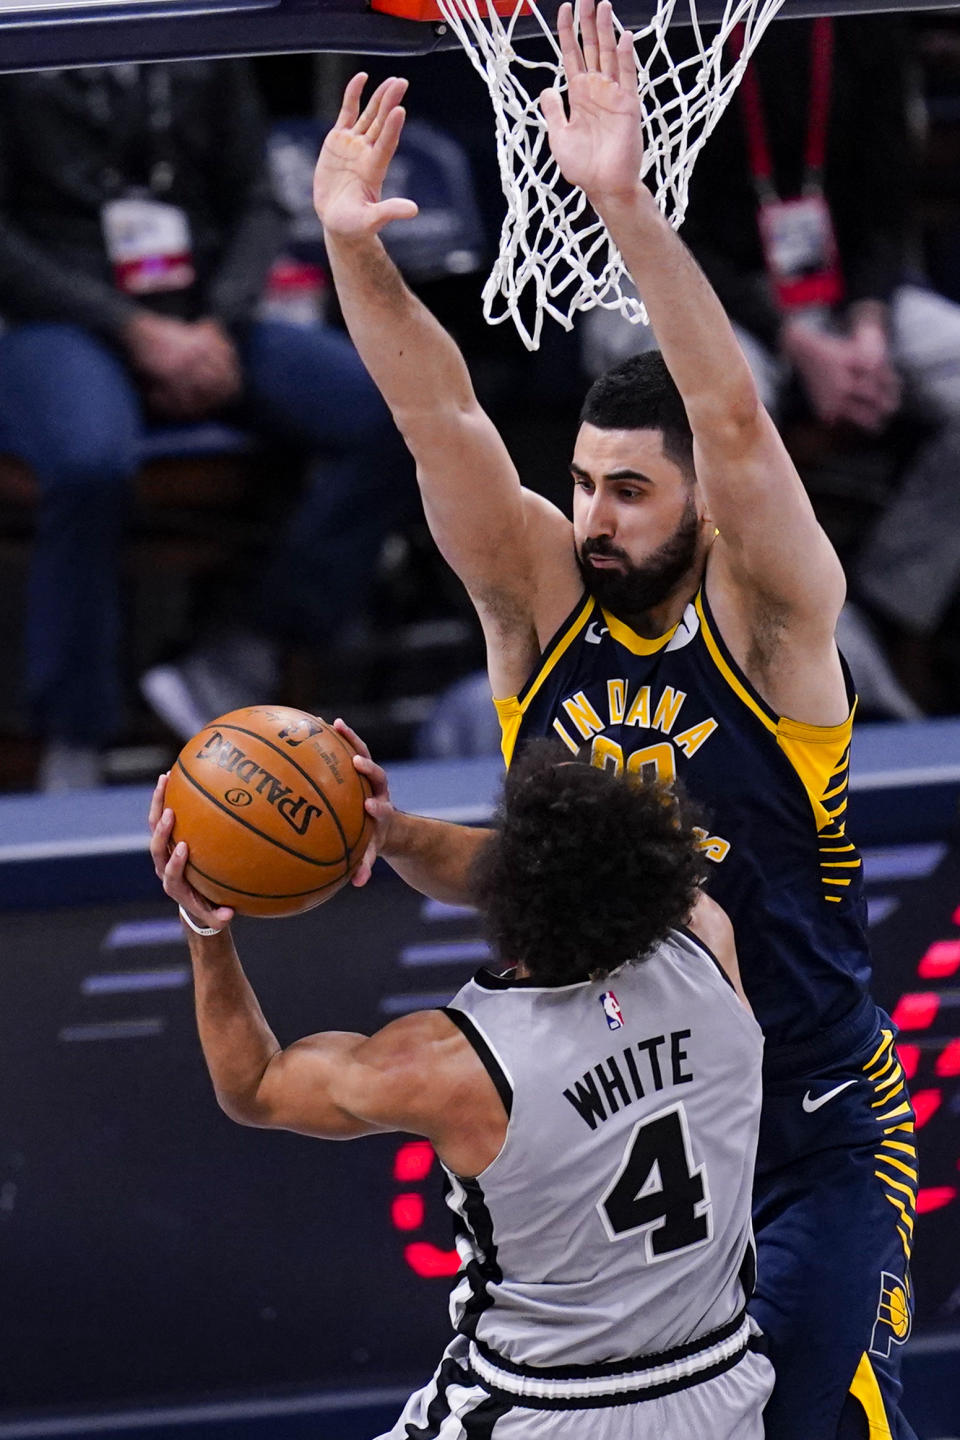 Indiana Pacers center Goga Bitadze (88) stops the shot of San Antonio Spurs guard Derrick White (4) during the first half of an NBA basketball game in Indianapolis, Monday, April 19, 2021. (AP Photo/Michael Conroy)